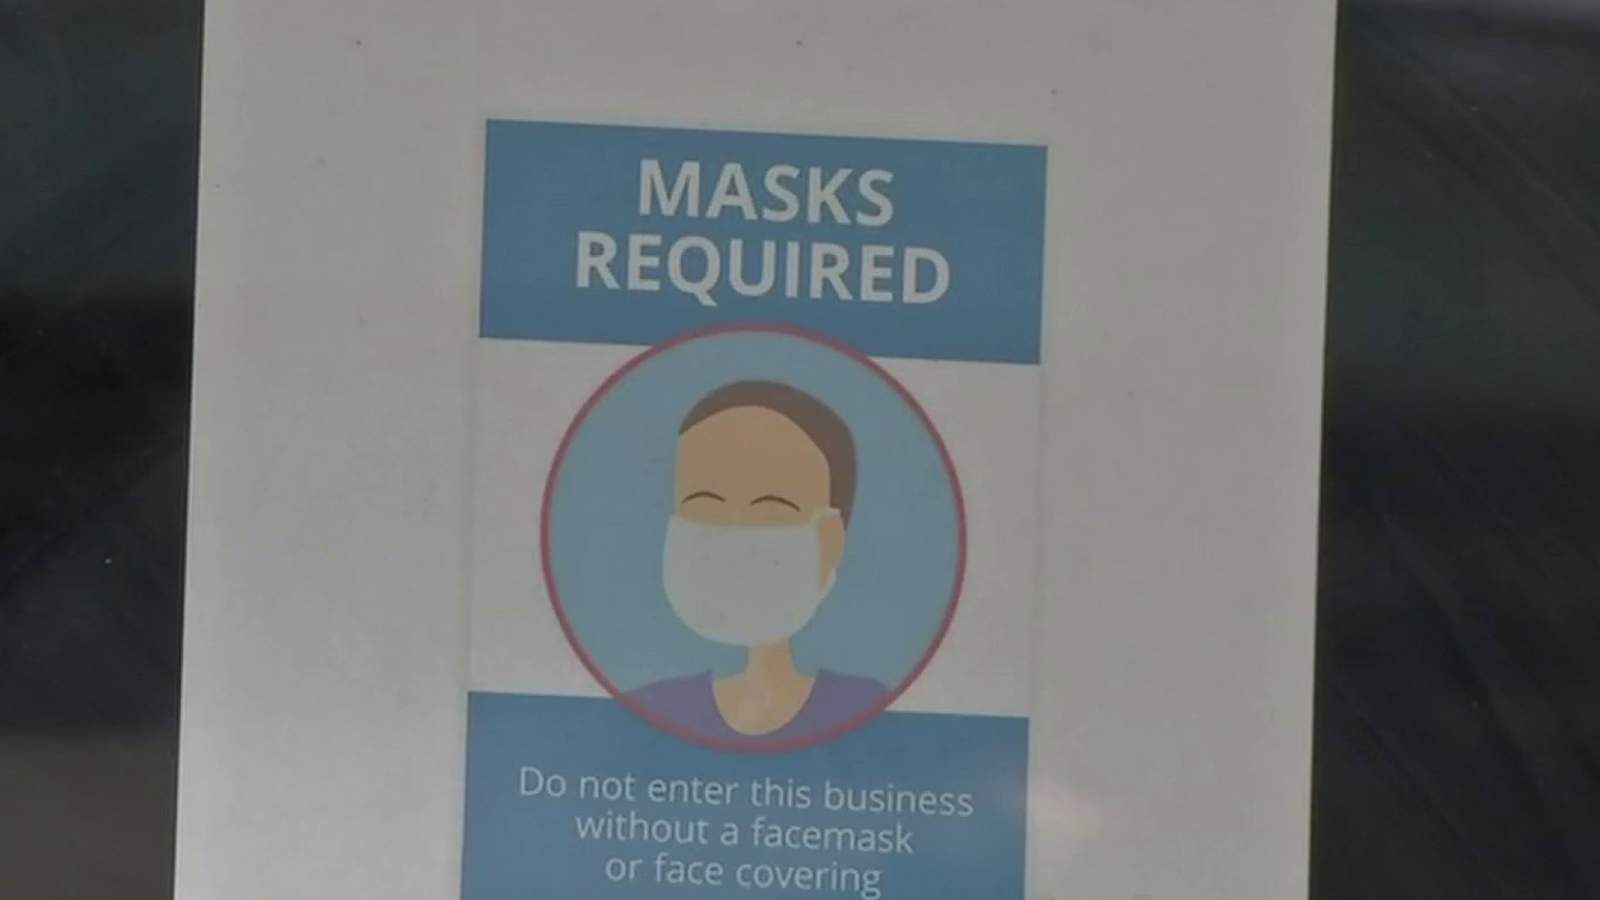 Heres how anti-maskers are protesting orders by wearing a mask